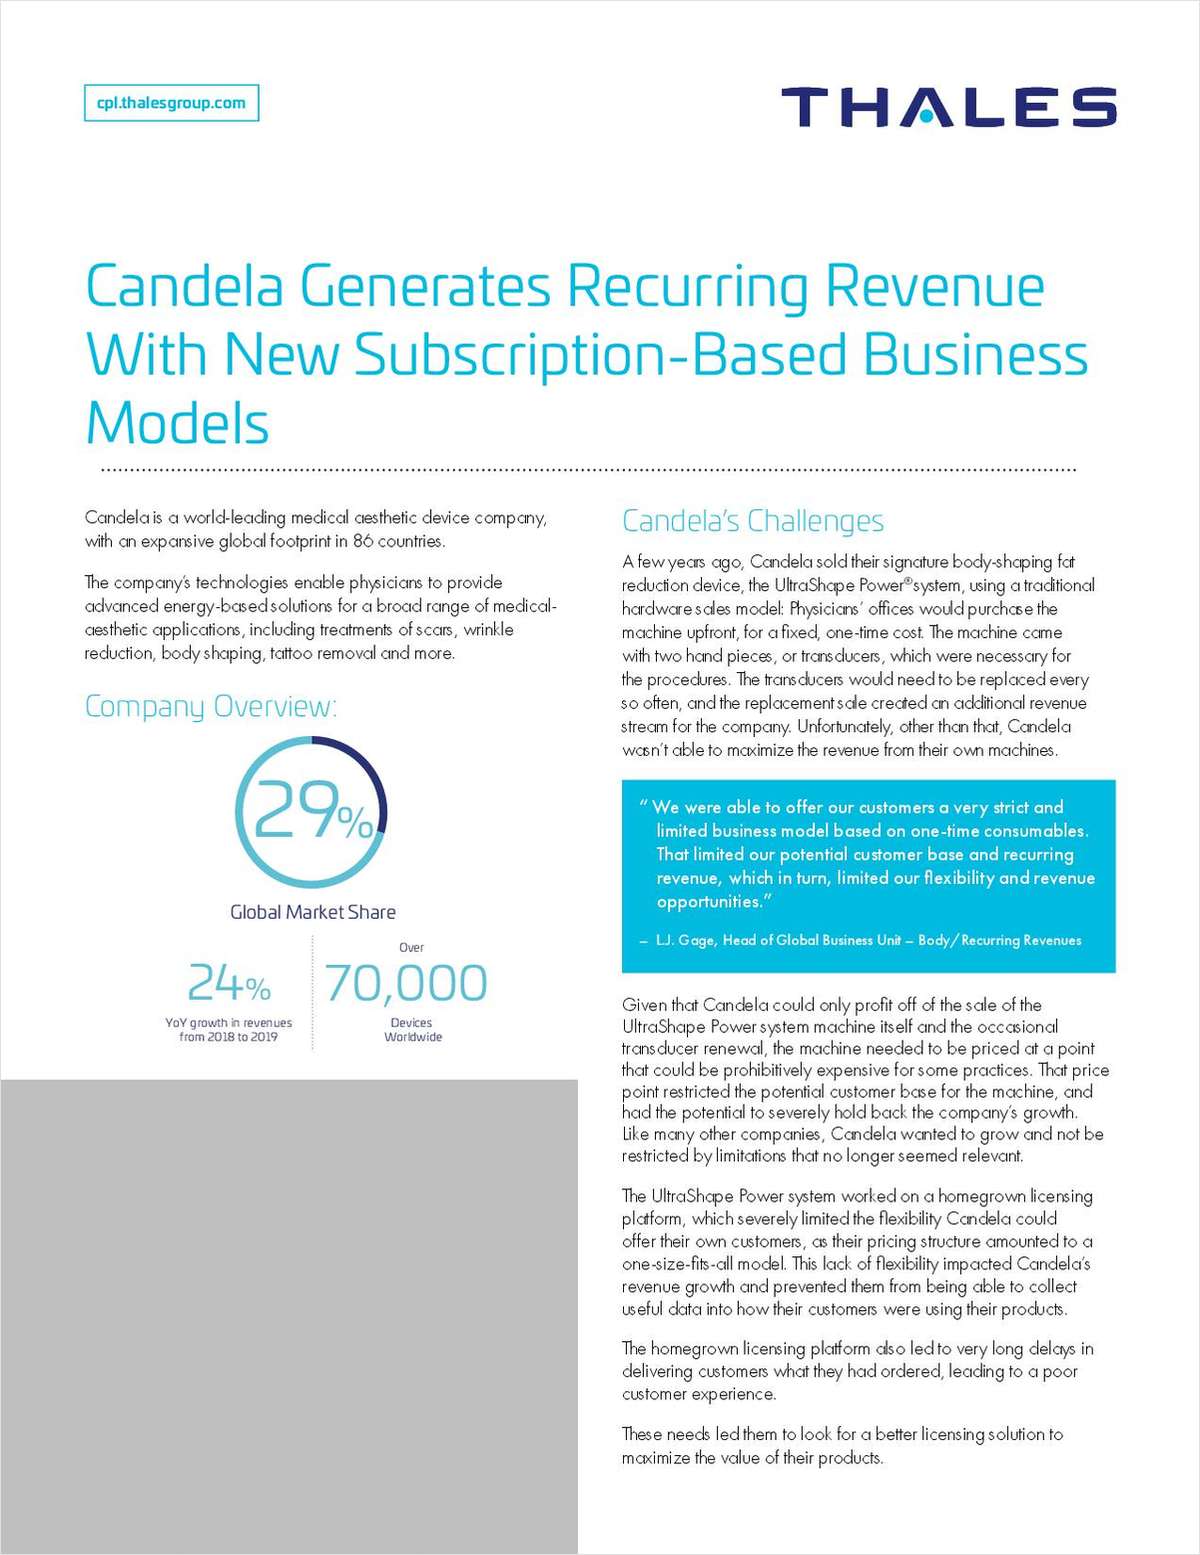 Medical aesthetic device company Candela generates recurring revenue with new subscription-based business models